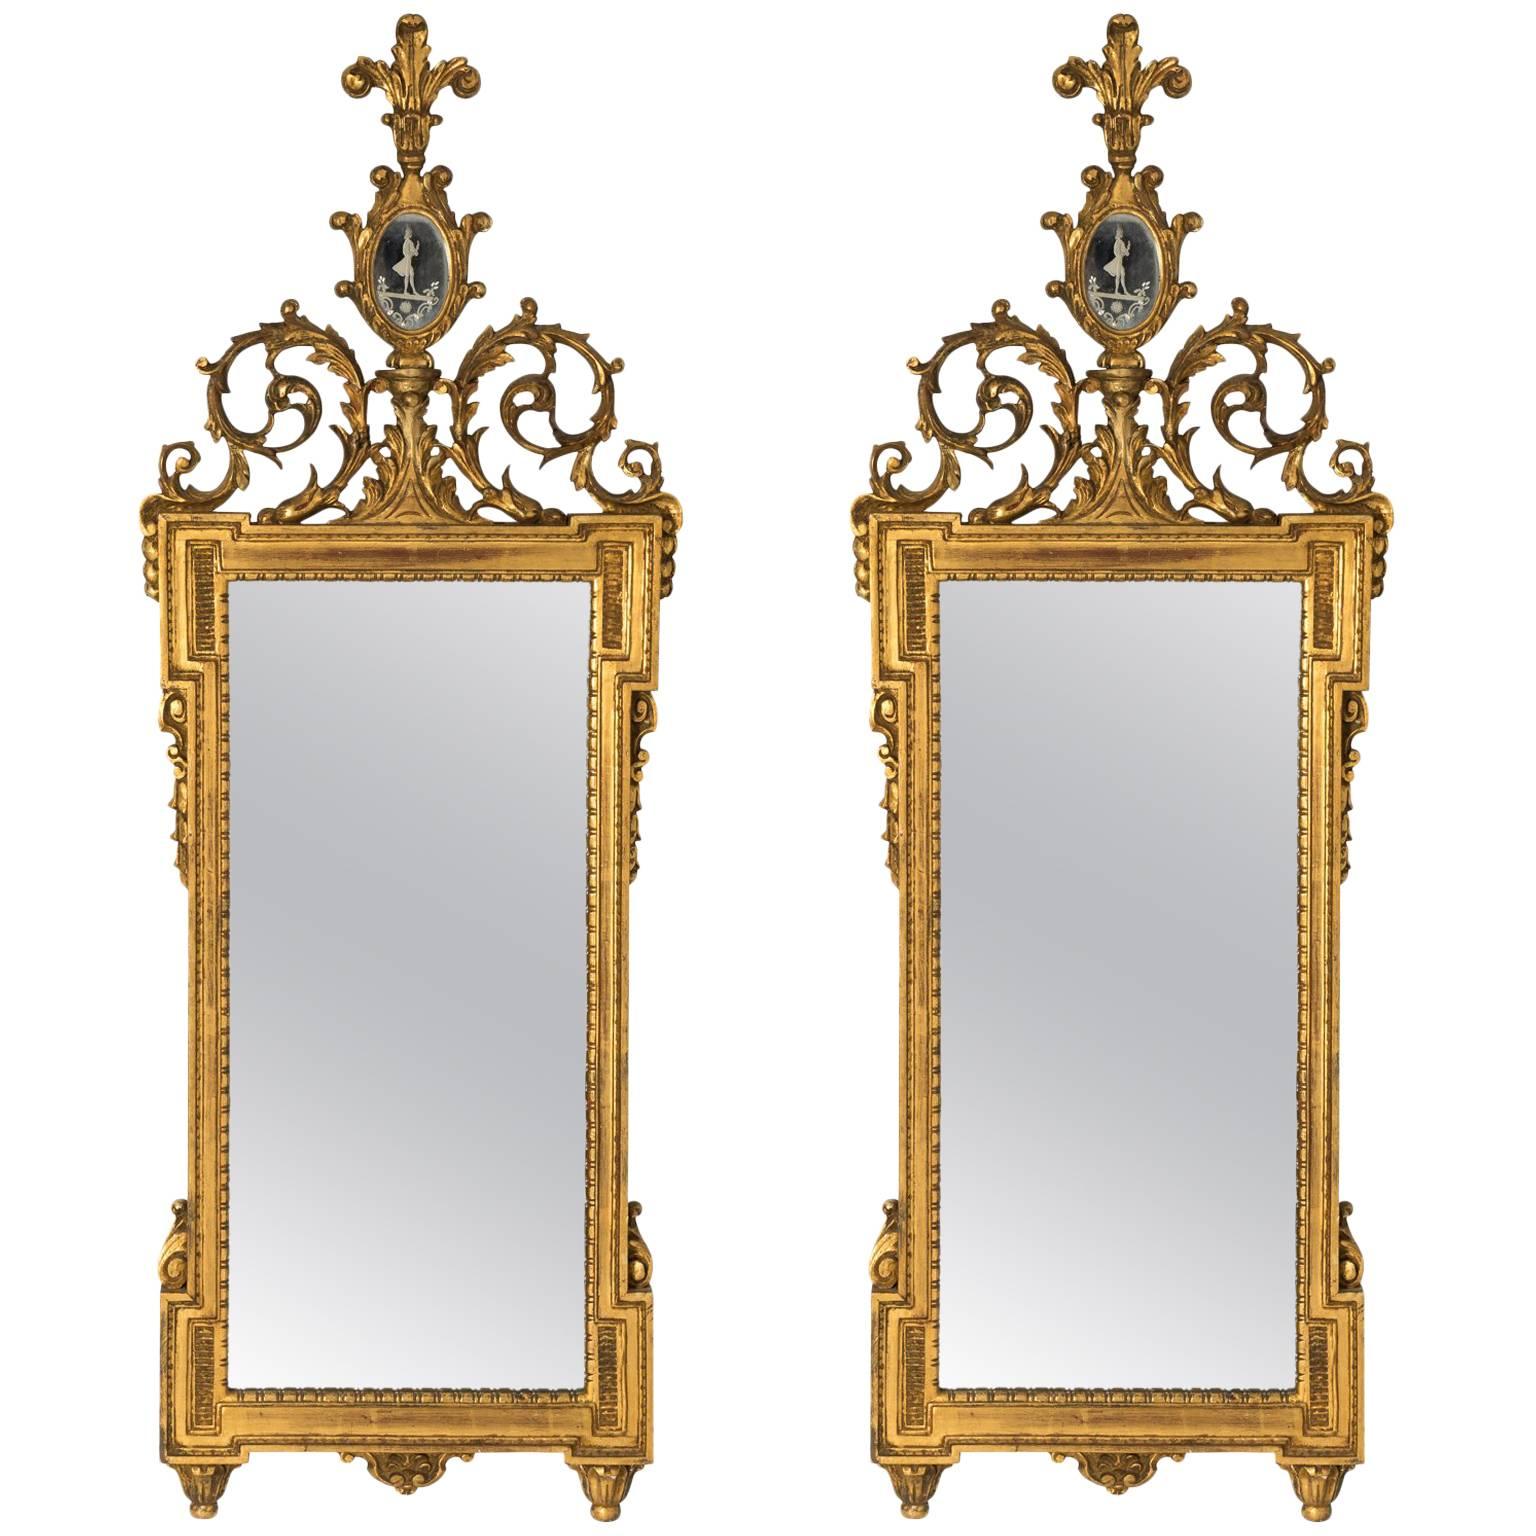 Pair of Neoclassical Gilded Mirrors